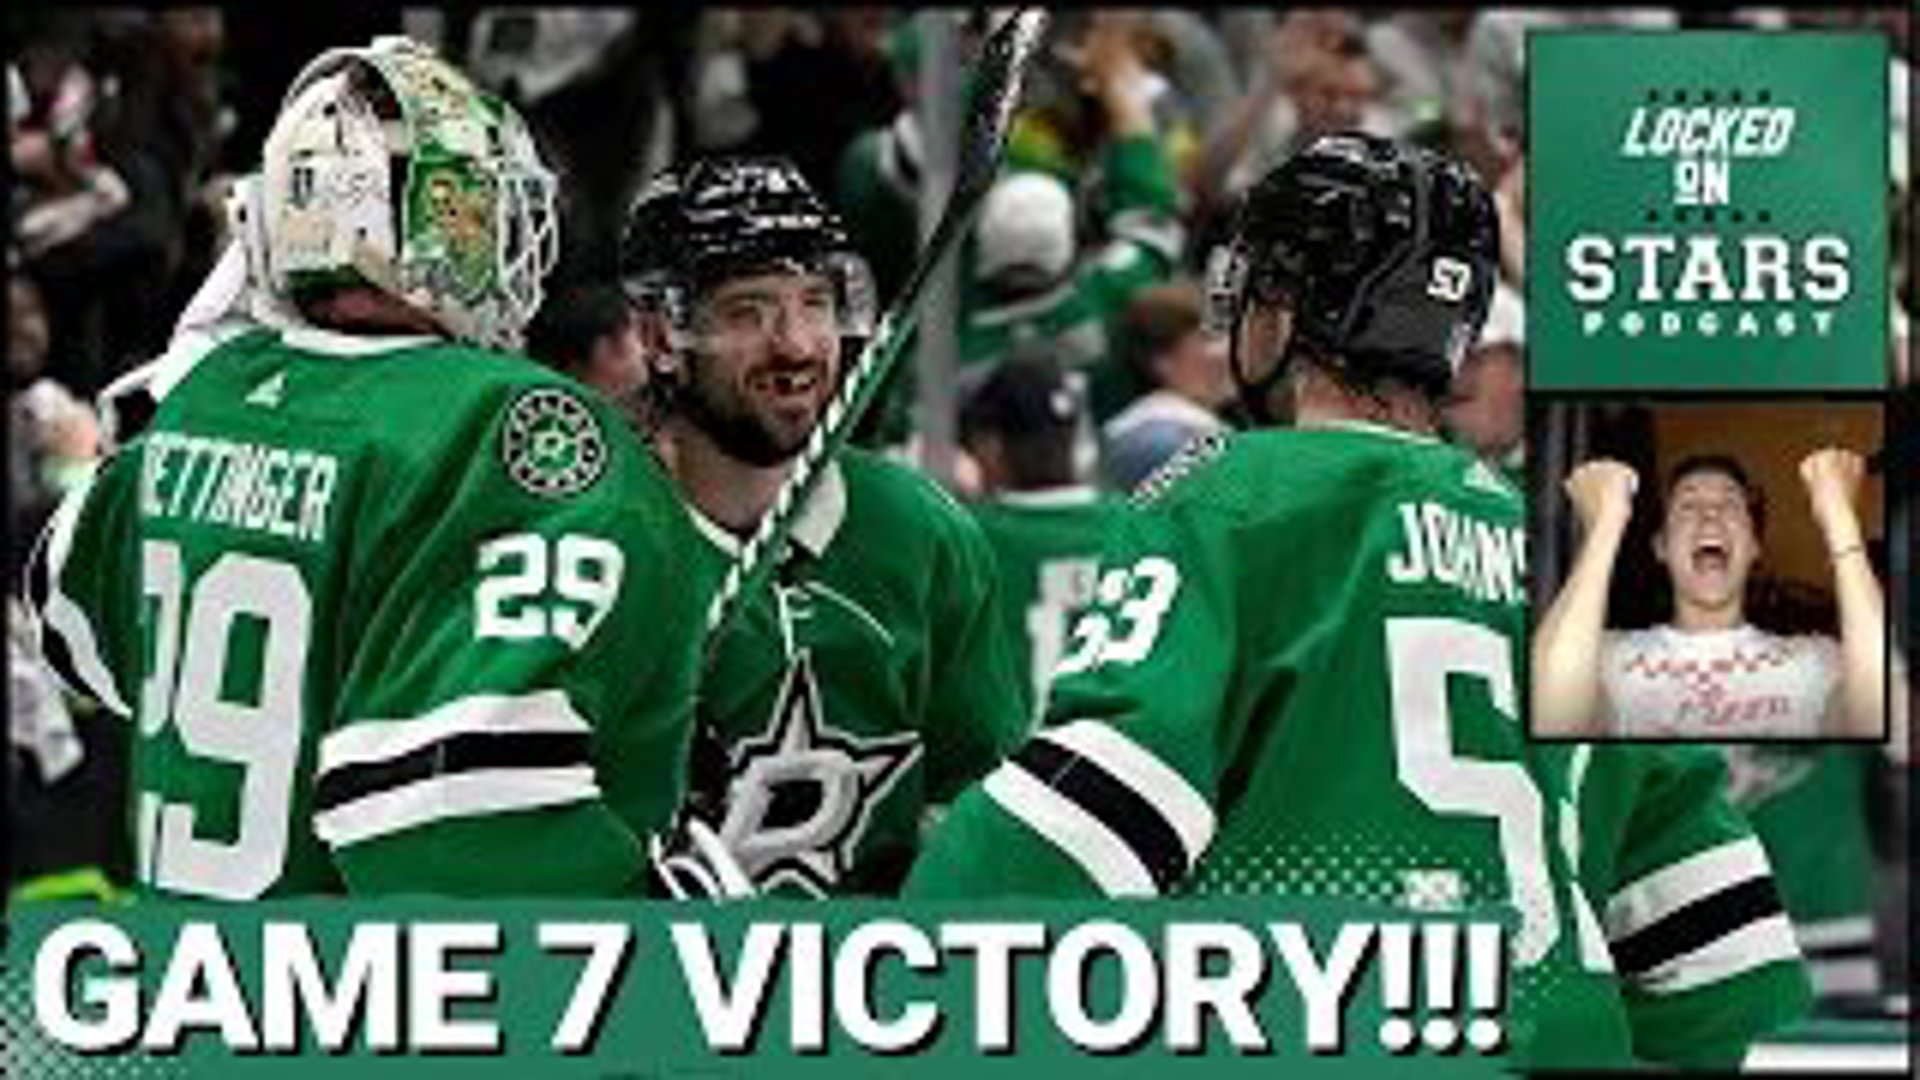 The Dallas Stars defeat the Vegas Golden Knights in Game 7 by a final score of 2-1 to move on in the Stanley Cup Playoffs. Joey reacts to the game and series!